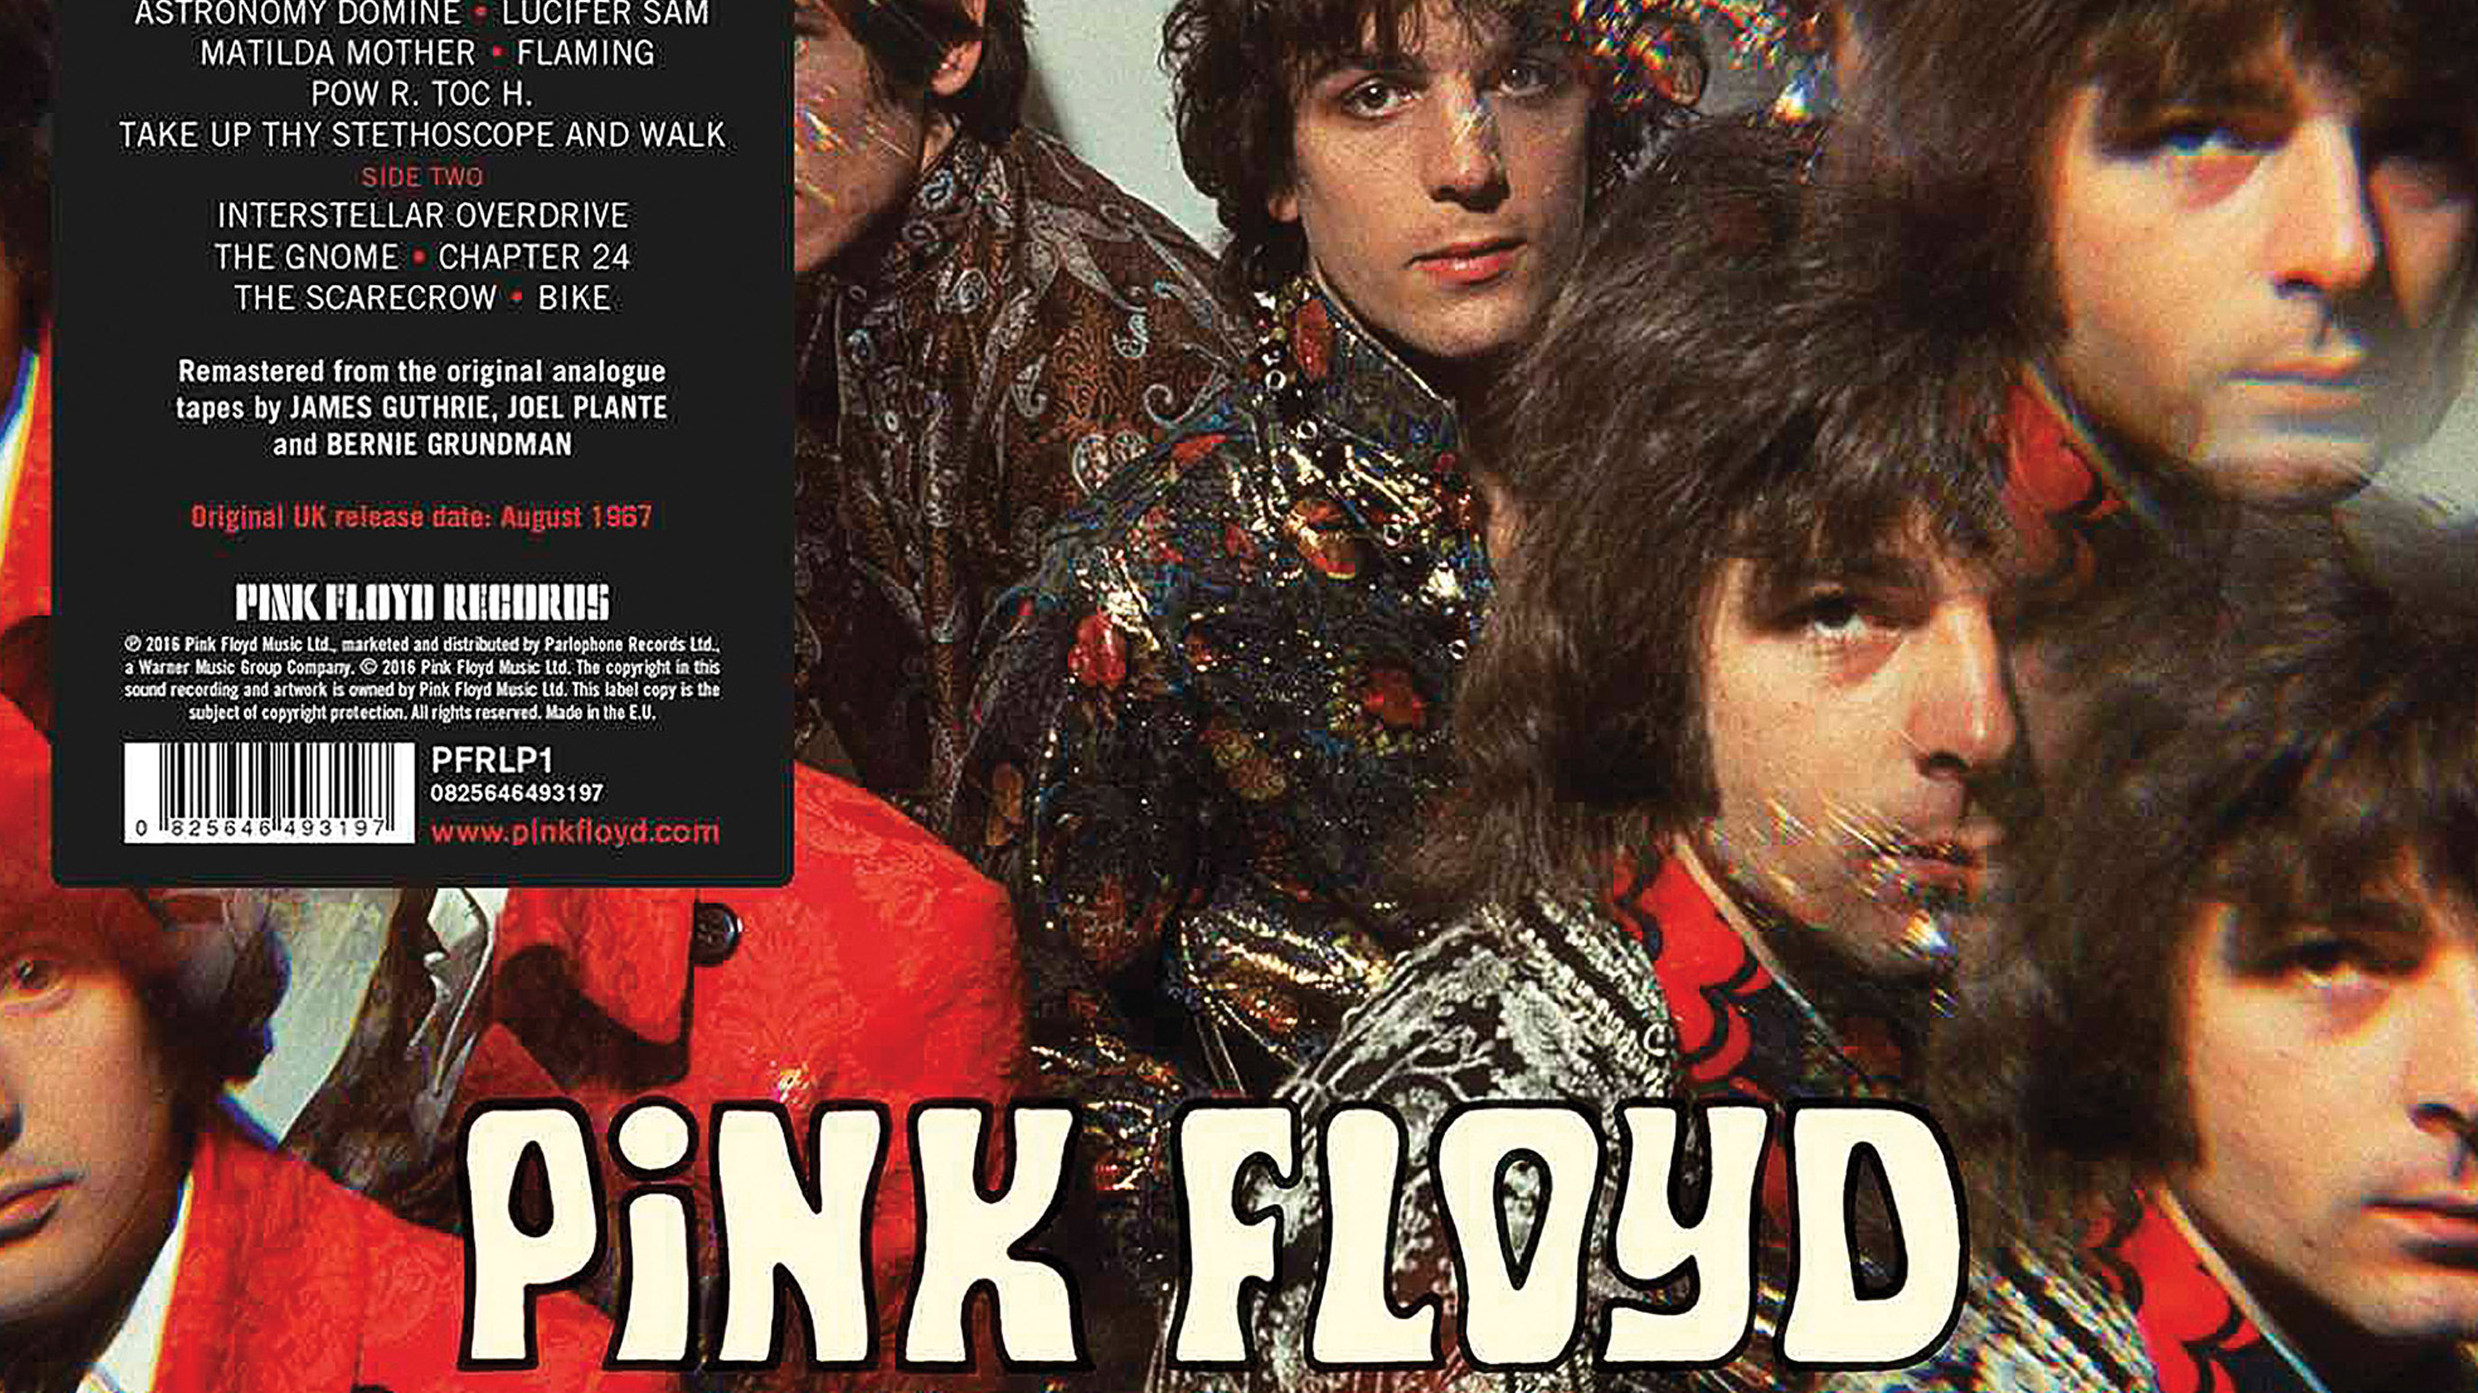 All pink floyd albums and release dates